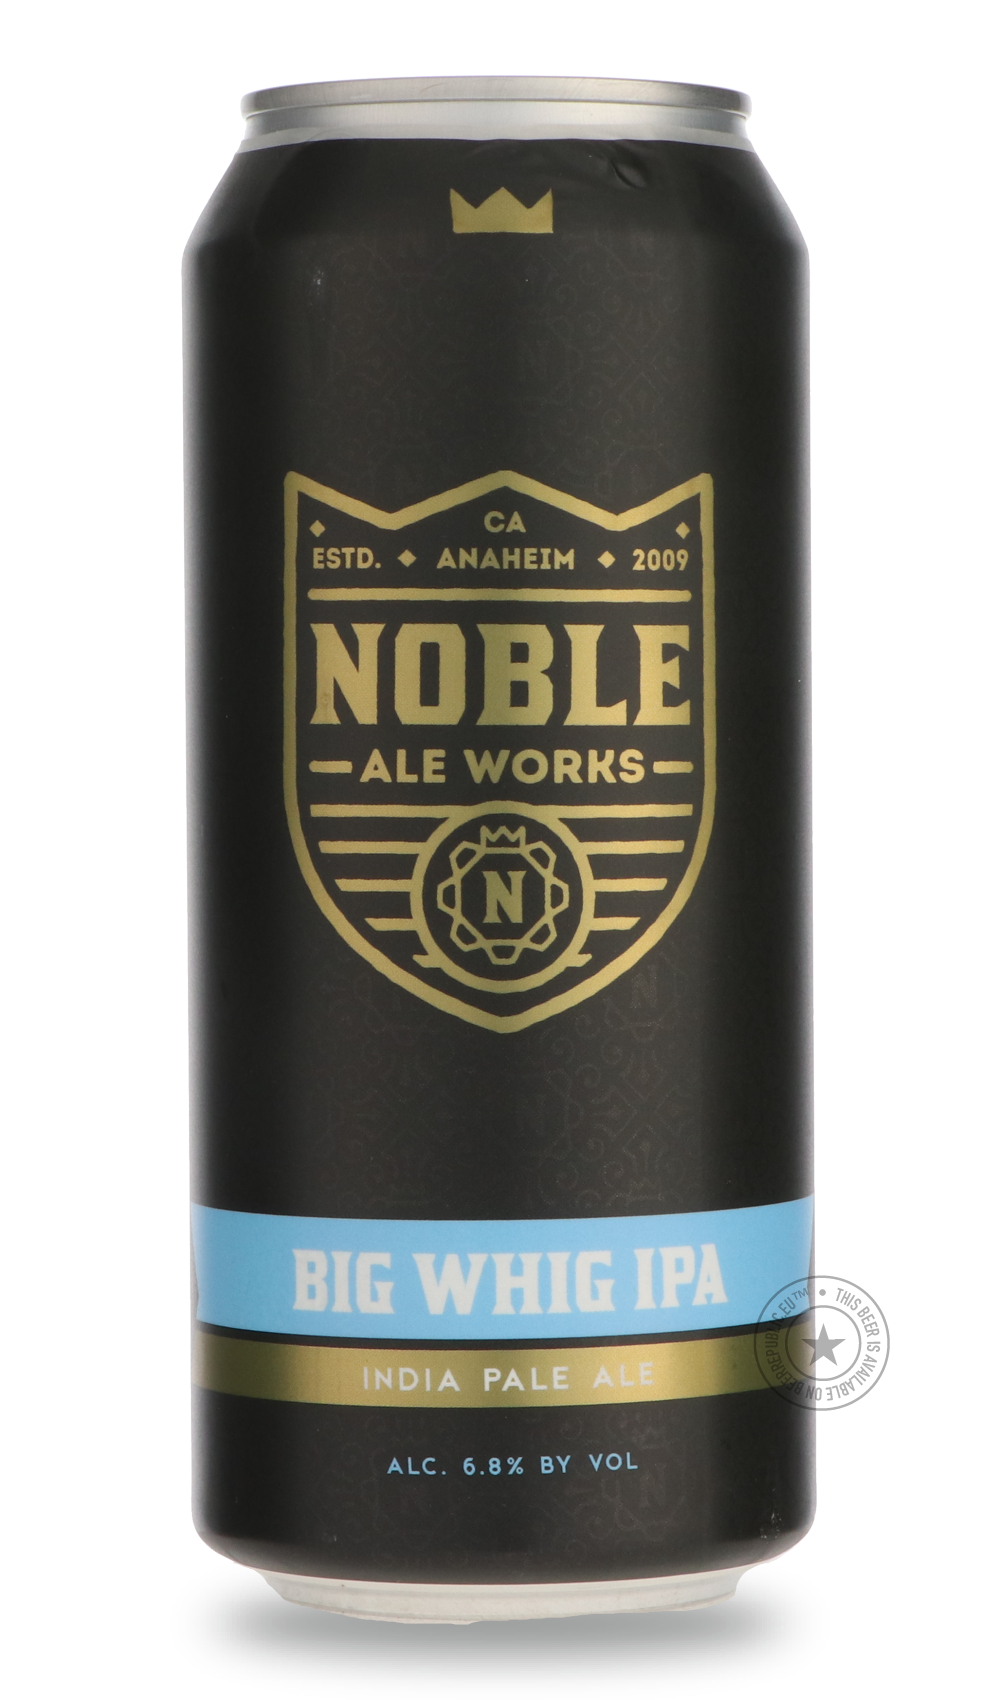 -Noble- Big Whig IPA-IPA- Only @ Beer Republic - The best online beer store for American & Canadian craft beer - Buy beer online from the USA and Canada - Bier online kopen - Amerikaans bier kopen - Craft beer store - Craft beer kopen - Amerikanisch bier kaufen - Bier online kaufen - Acheter biere online - IPA - Stout - Porter - New England IPA - Hazy IPA - Imperial Stout - Barrel Aged - Barrel Aged Imperial Stout - Brown - Dark beer - Blond - Blonde - Pilsner - Lager - Wheat - Weizen - Amber - Barley Wine 